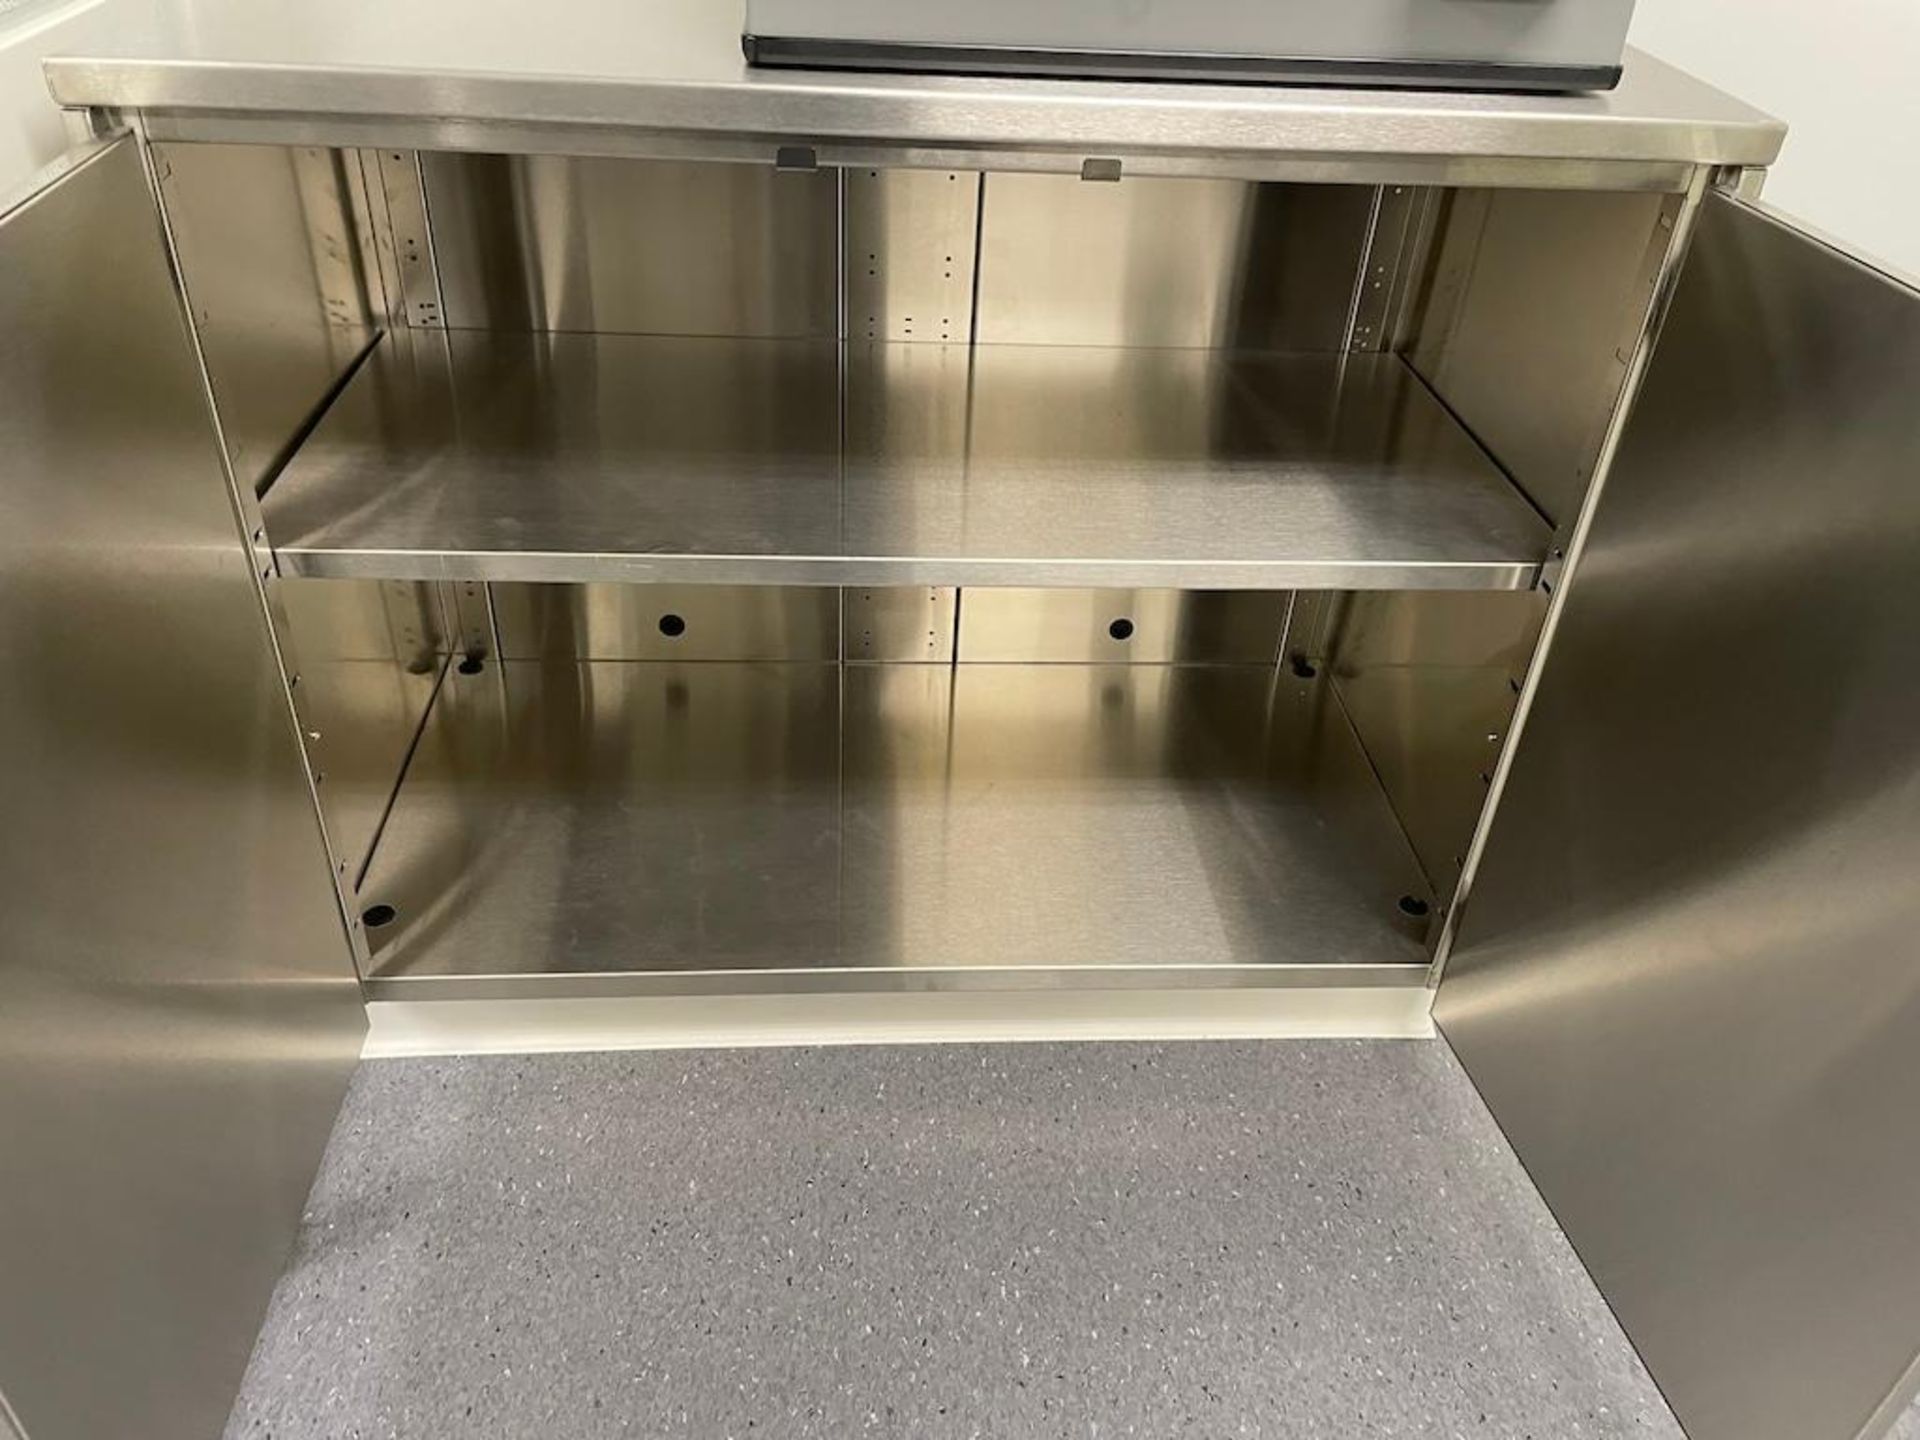 LOT (2) STAINLESS STEEL LAB TABLES APPROX 76 X 33 IN, 36 X 30 IN, (2) STAINLESS STEEL 2 DOOR CABINET - Image 6 of 6